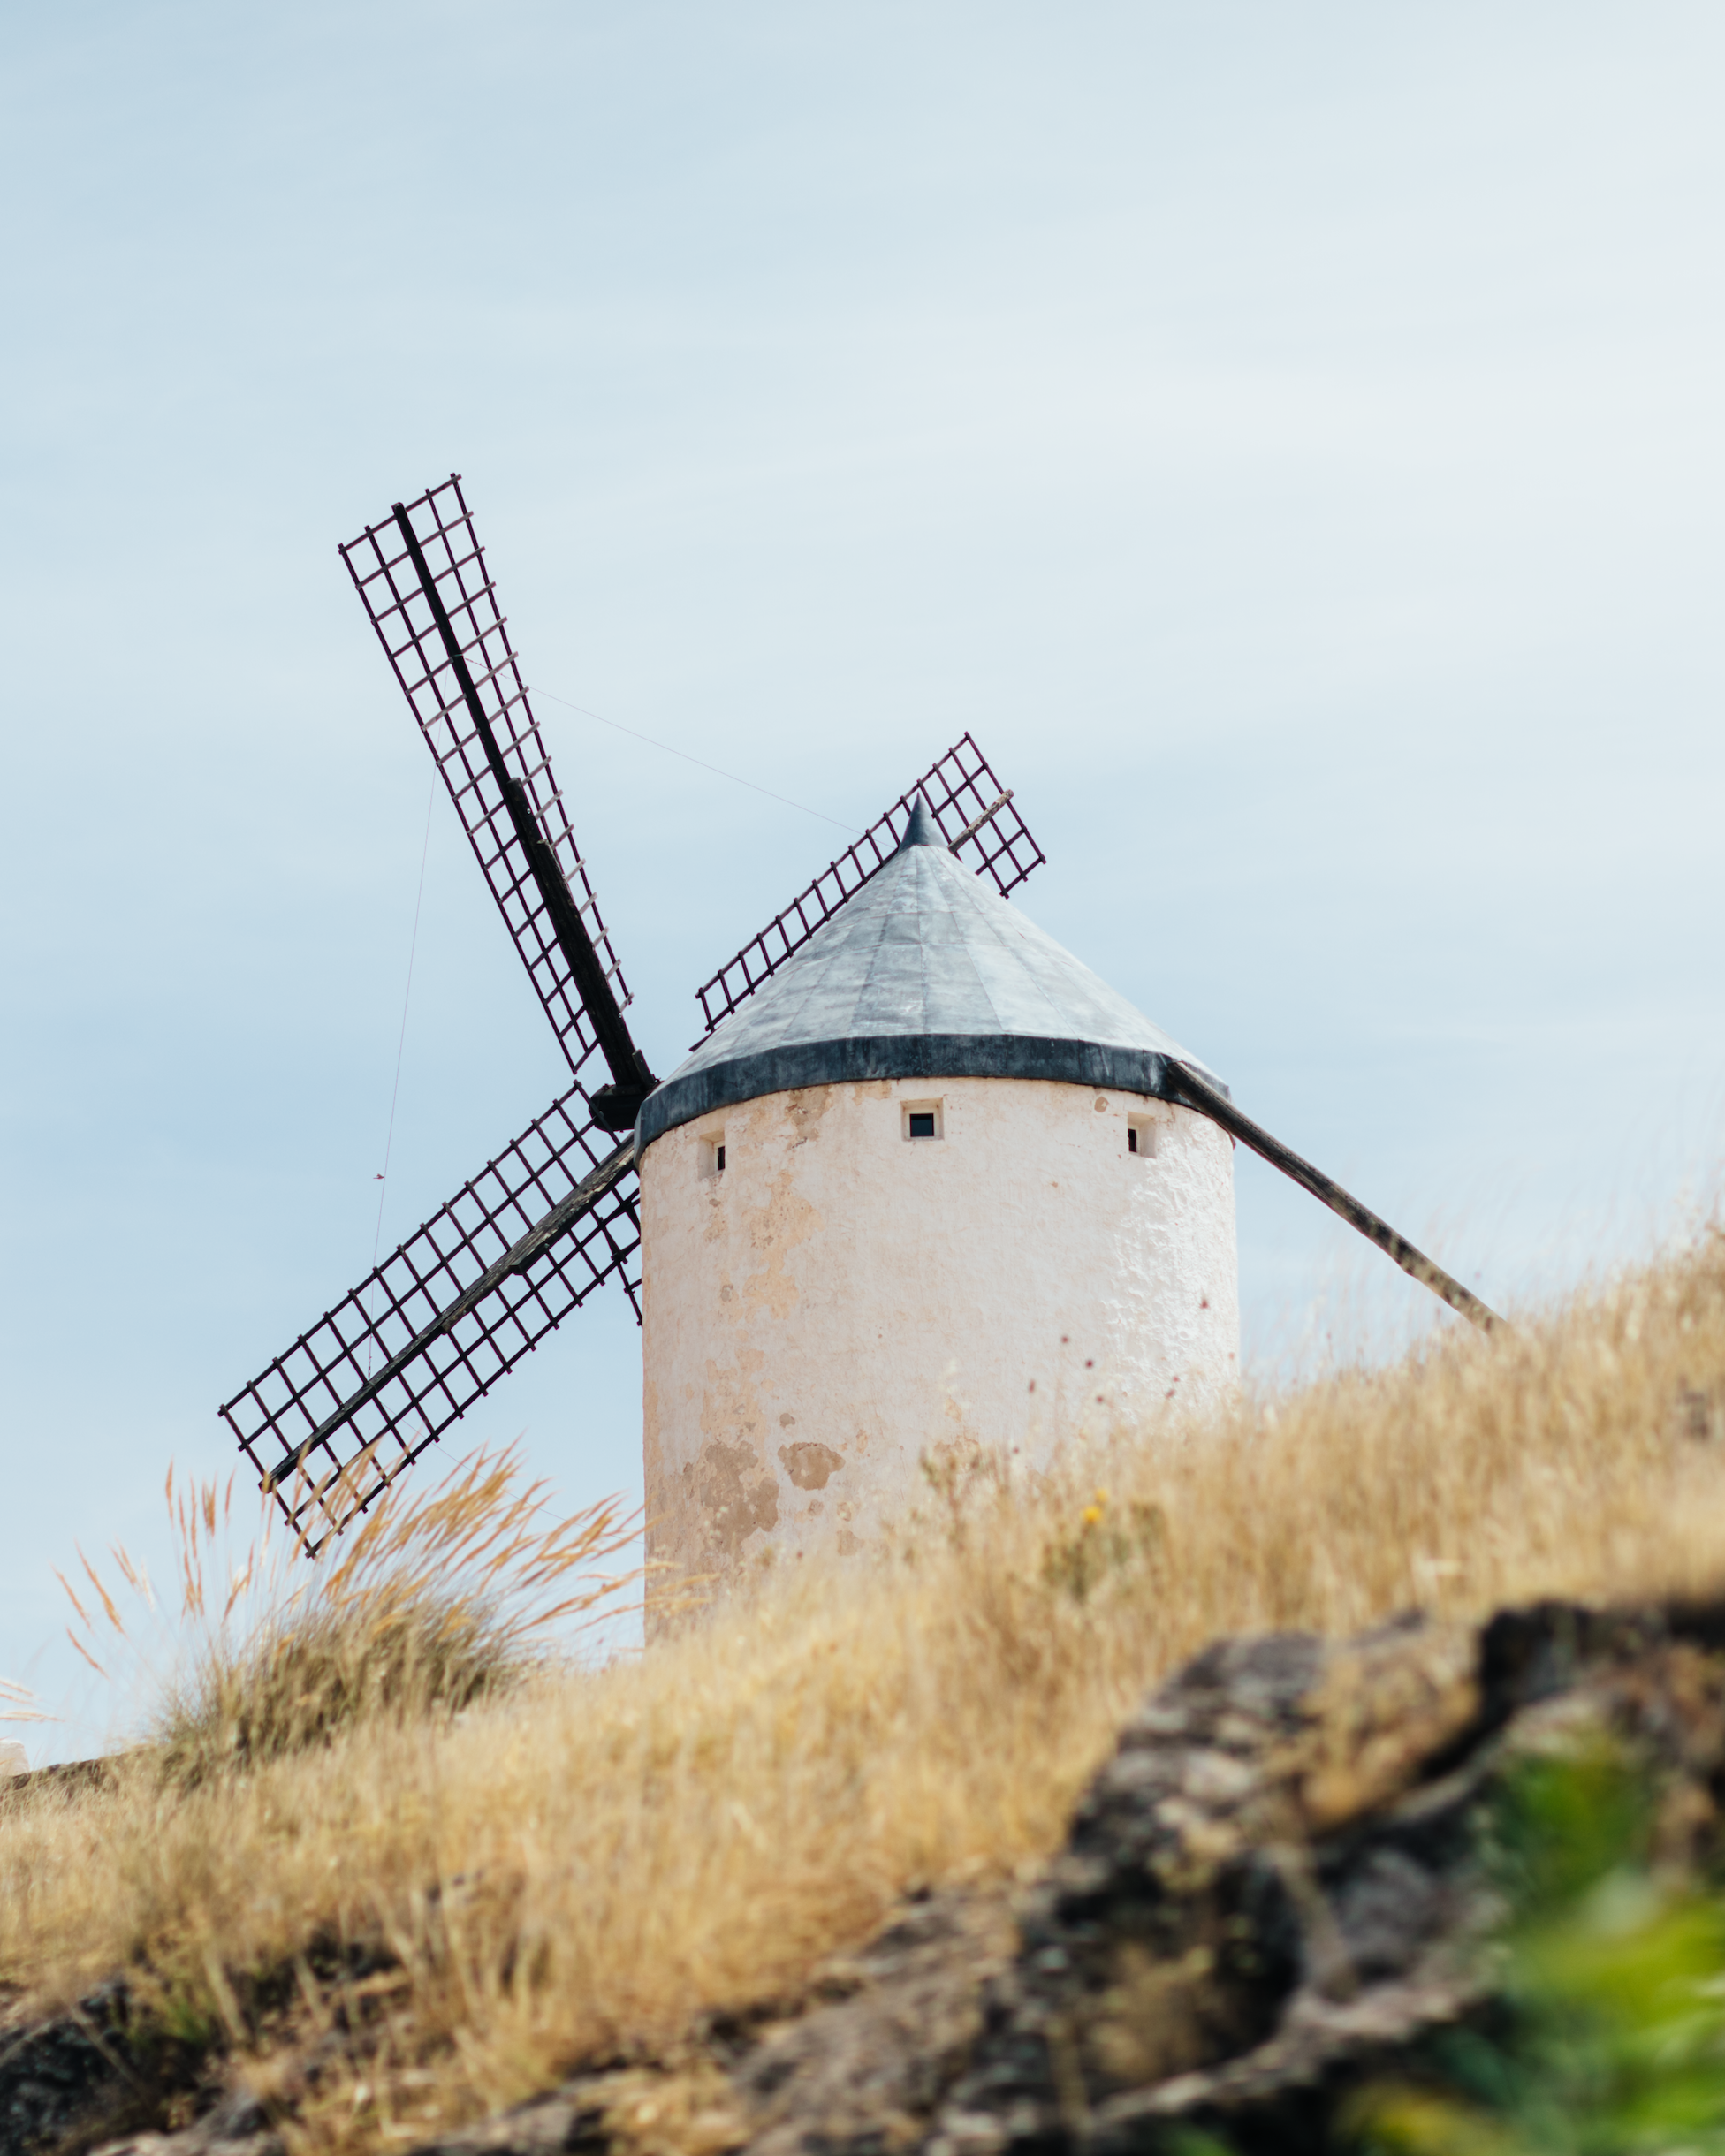 A windmill in Consuegra, shown on an EF tour where Group Leaders rediscovered their passion for teaching.